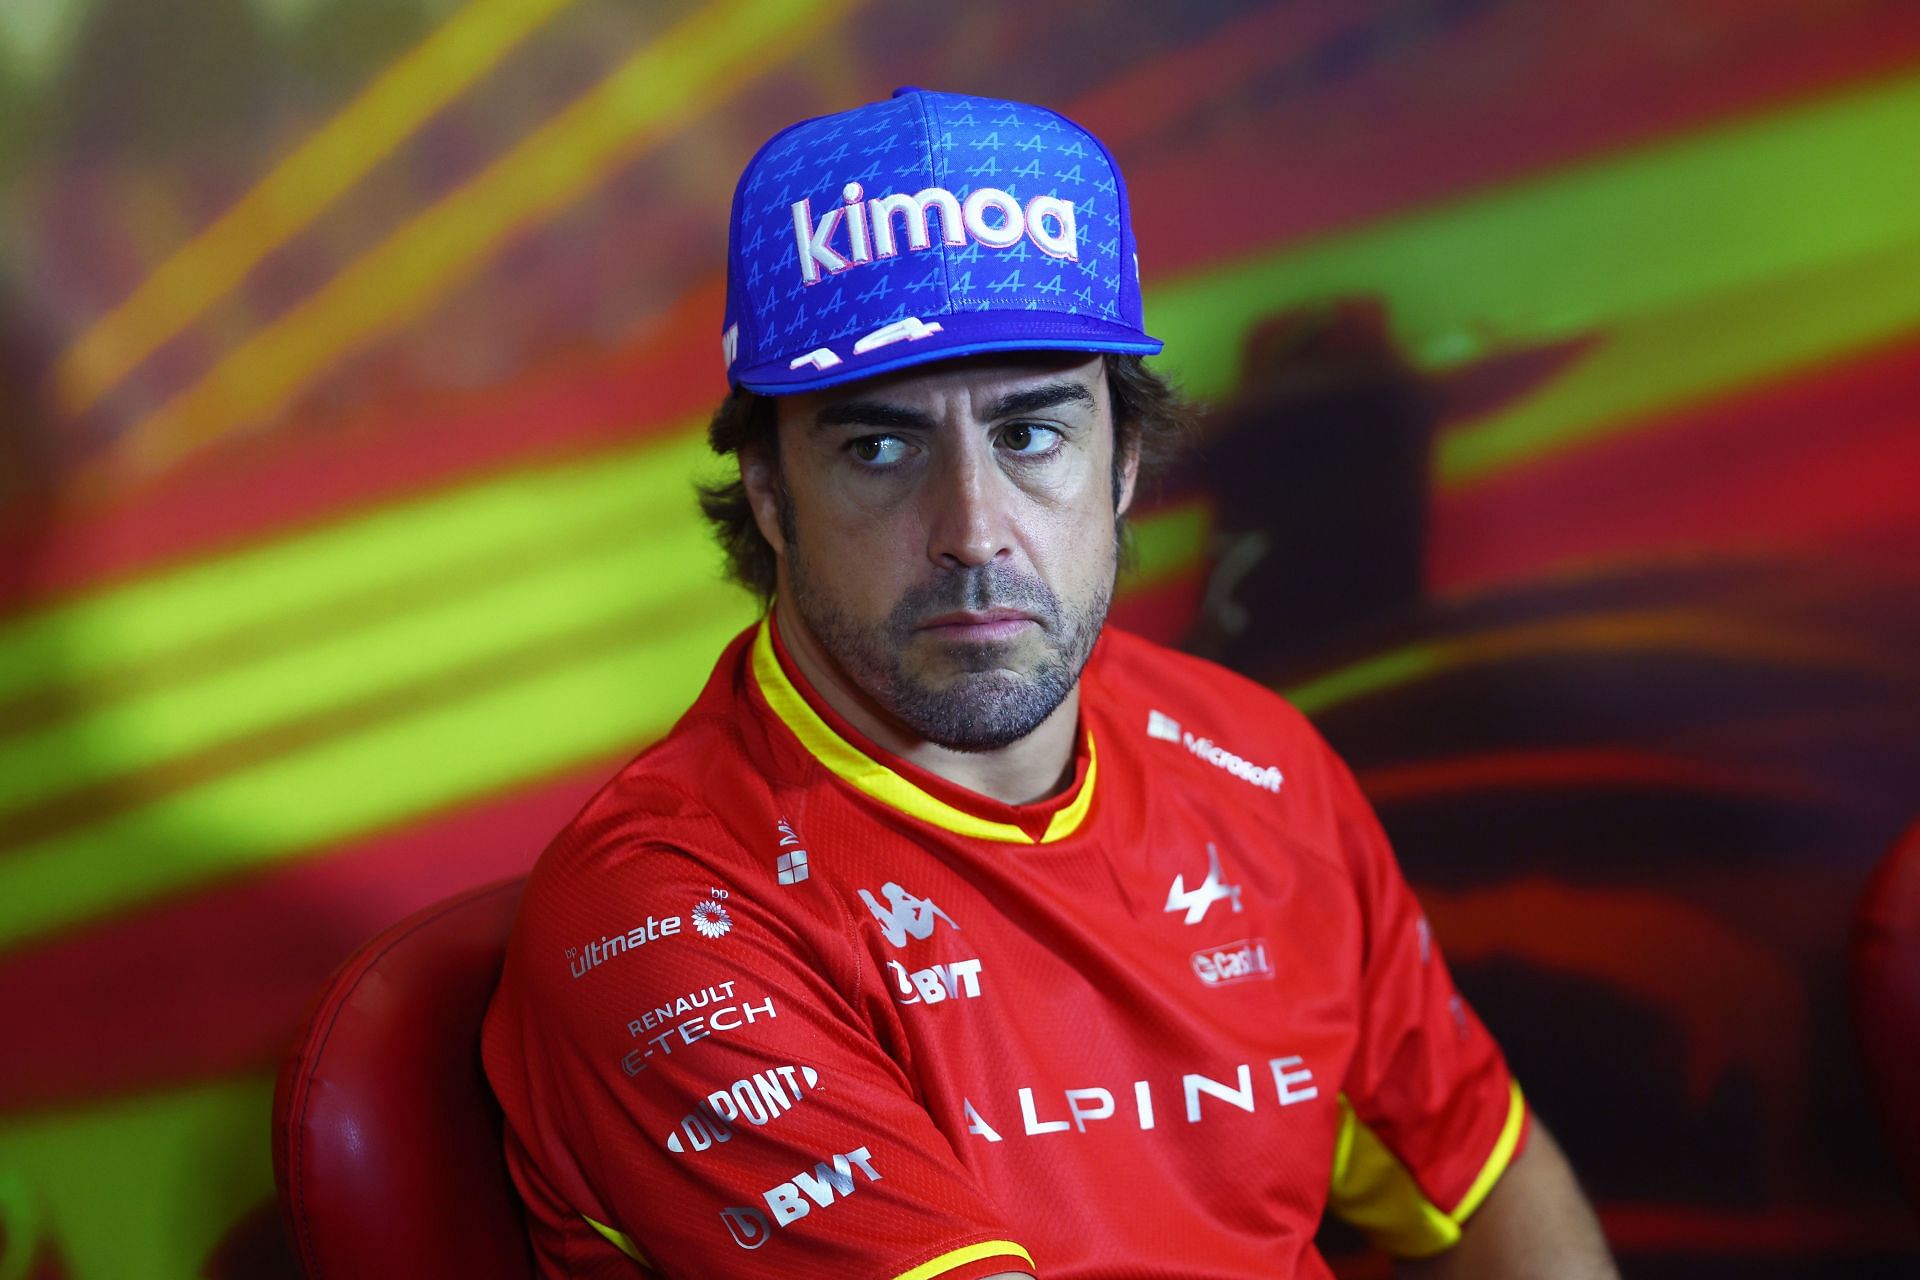 Fernando Alonso was left disappointed after a poor showing in qualifying